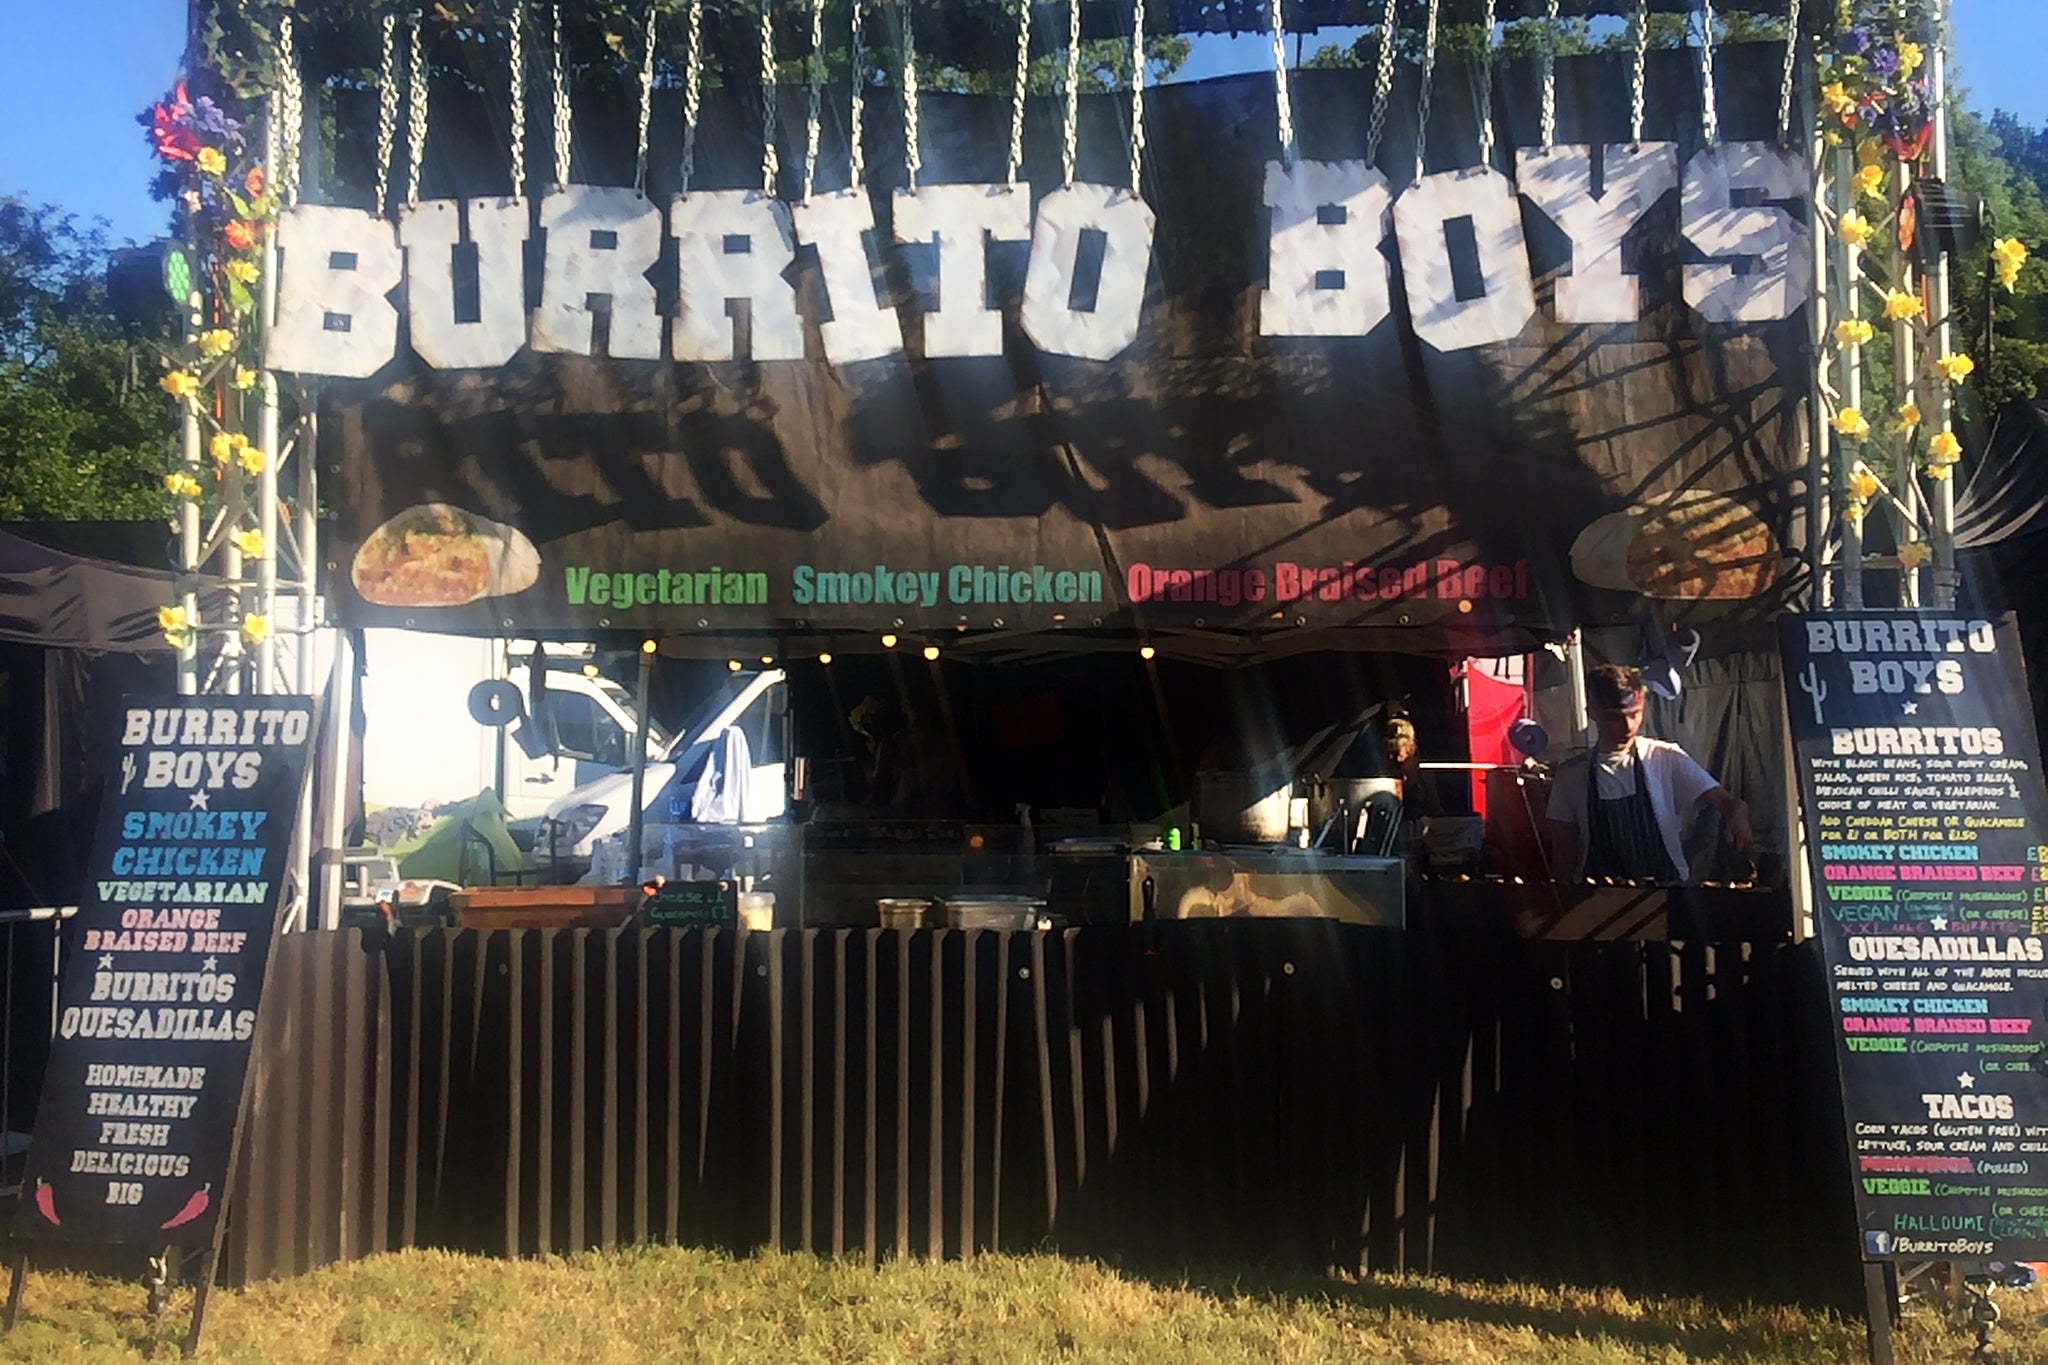 Burrito Boys owner Alex Schomberg feels pressure from customers asking why prices are so high